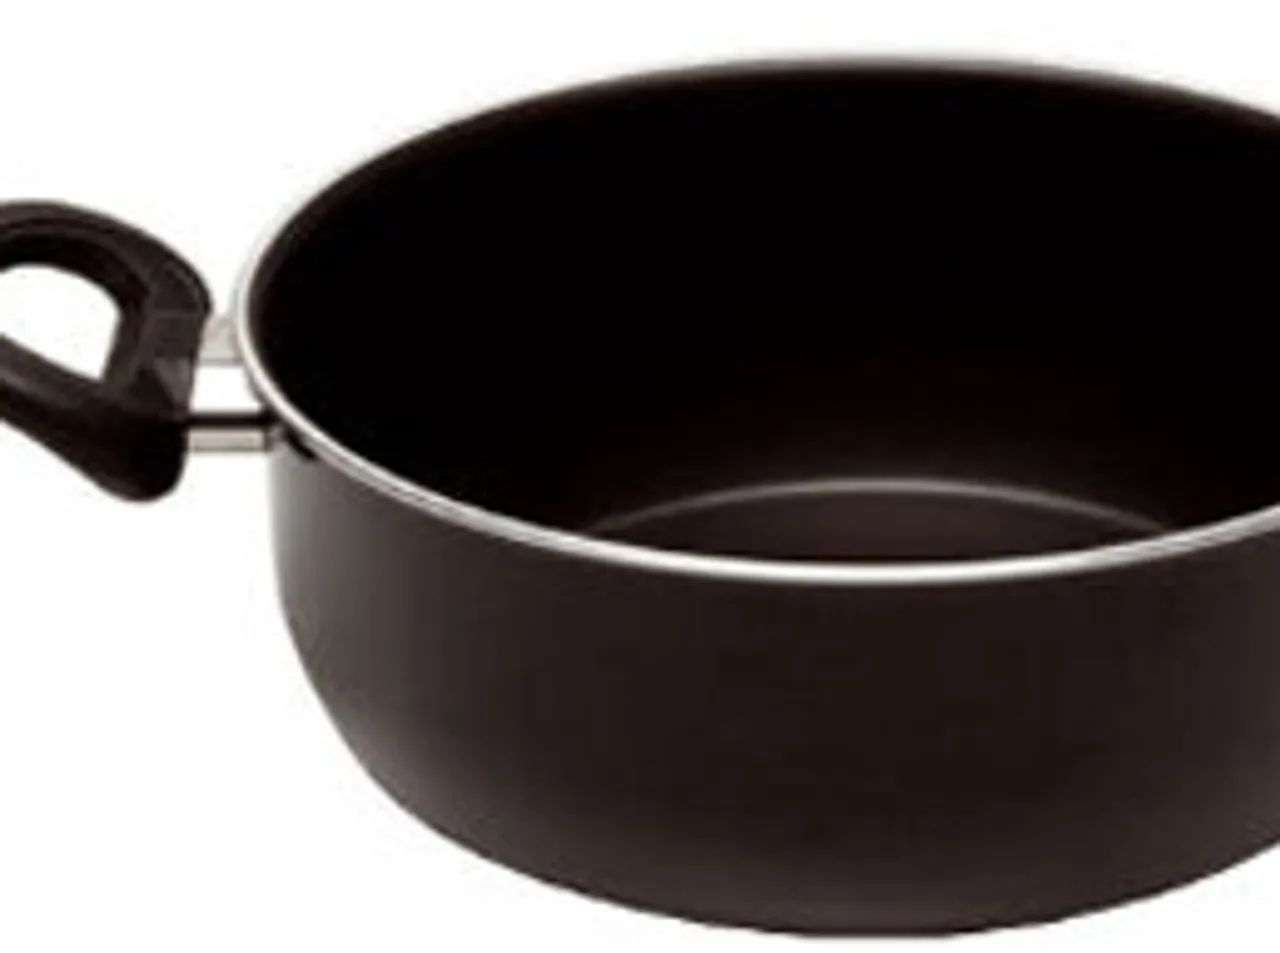 Taking care of non stick pans